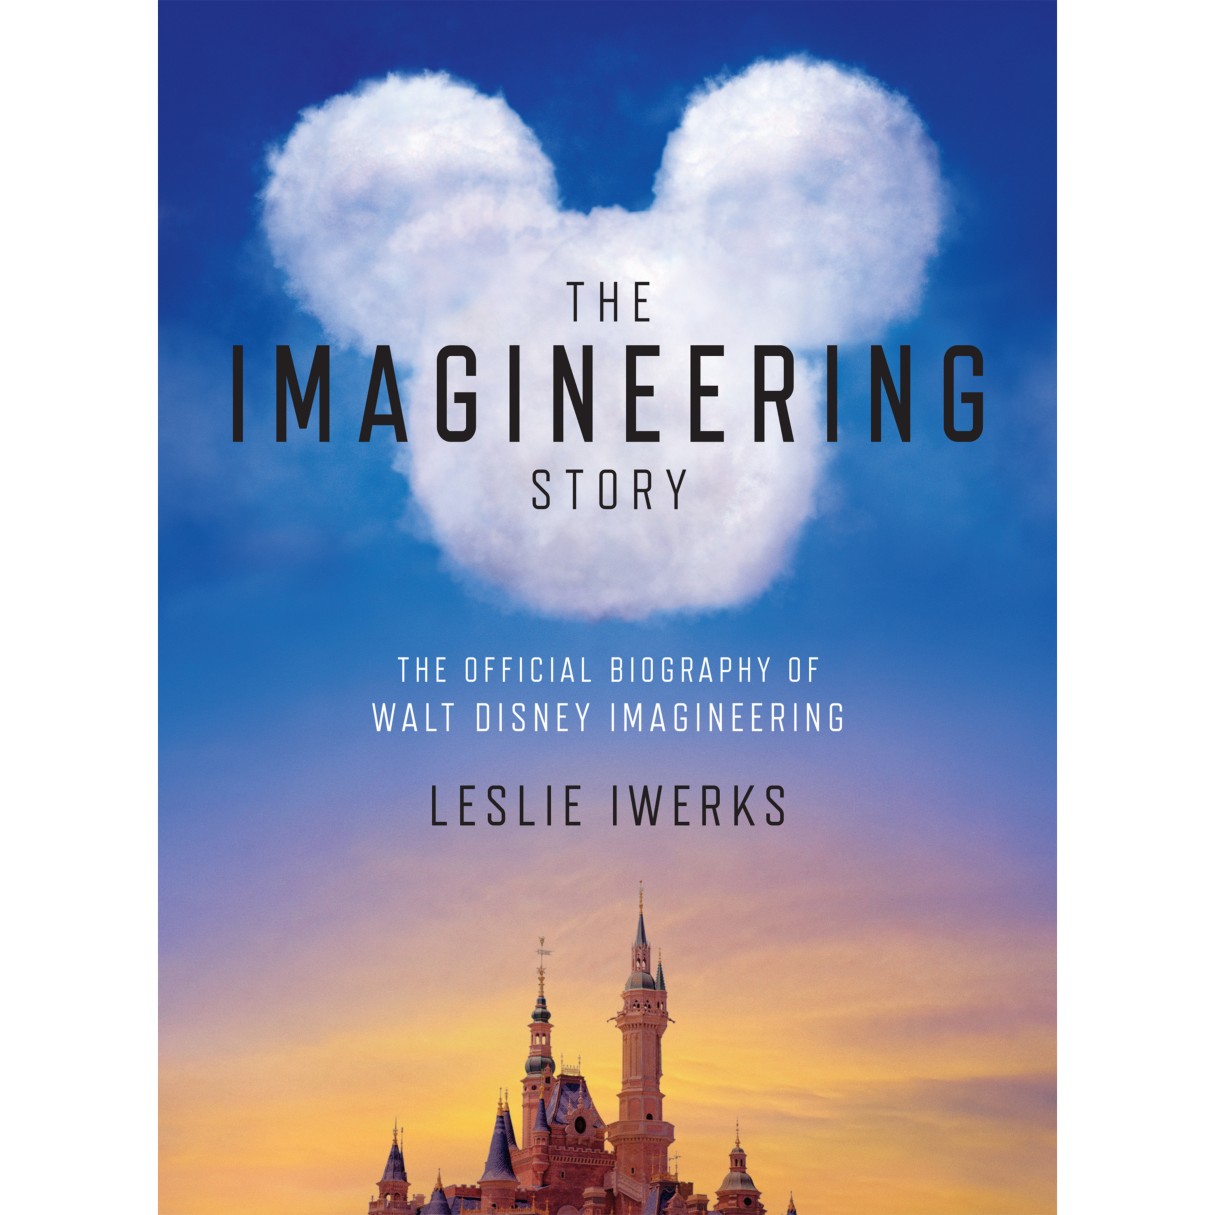 The Imagineering Story: The Official Biography of Walt Disney Imagineering